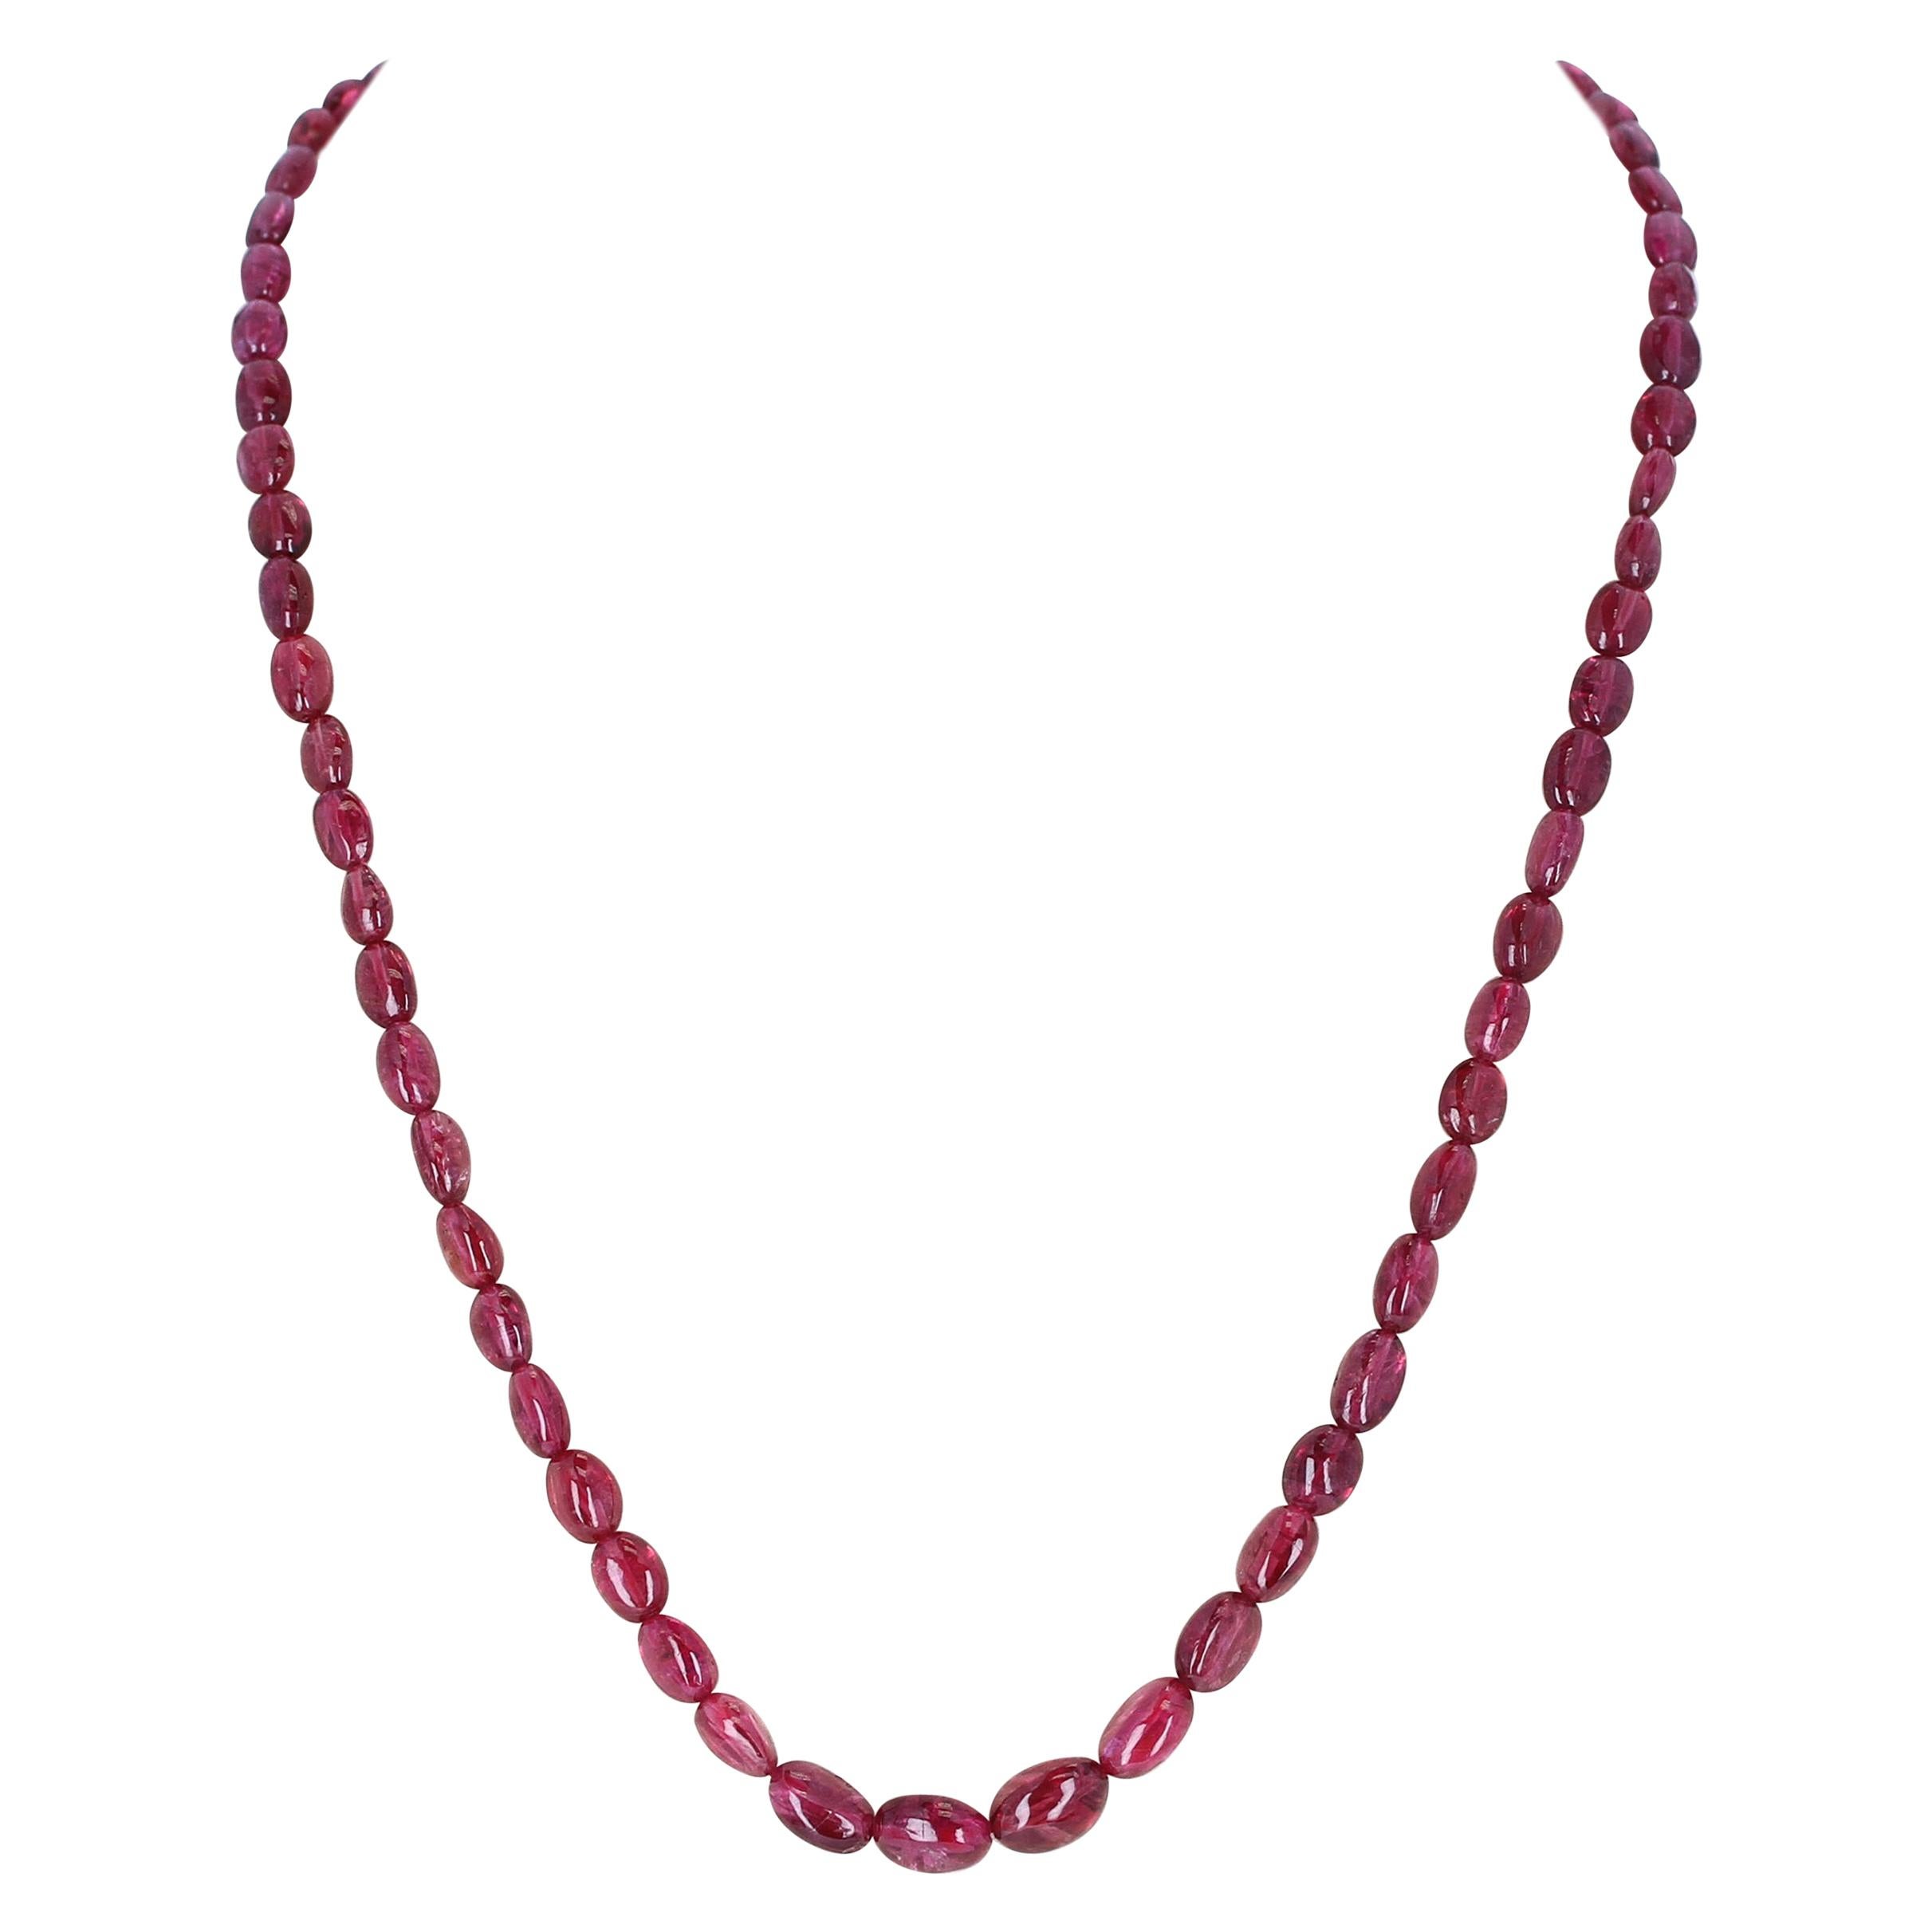 Spinel Smooth Tumbled Beads Necklace, Toggle Clasp